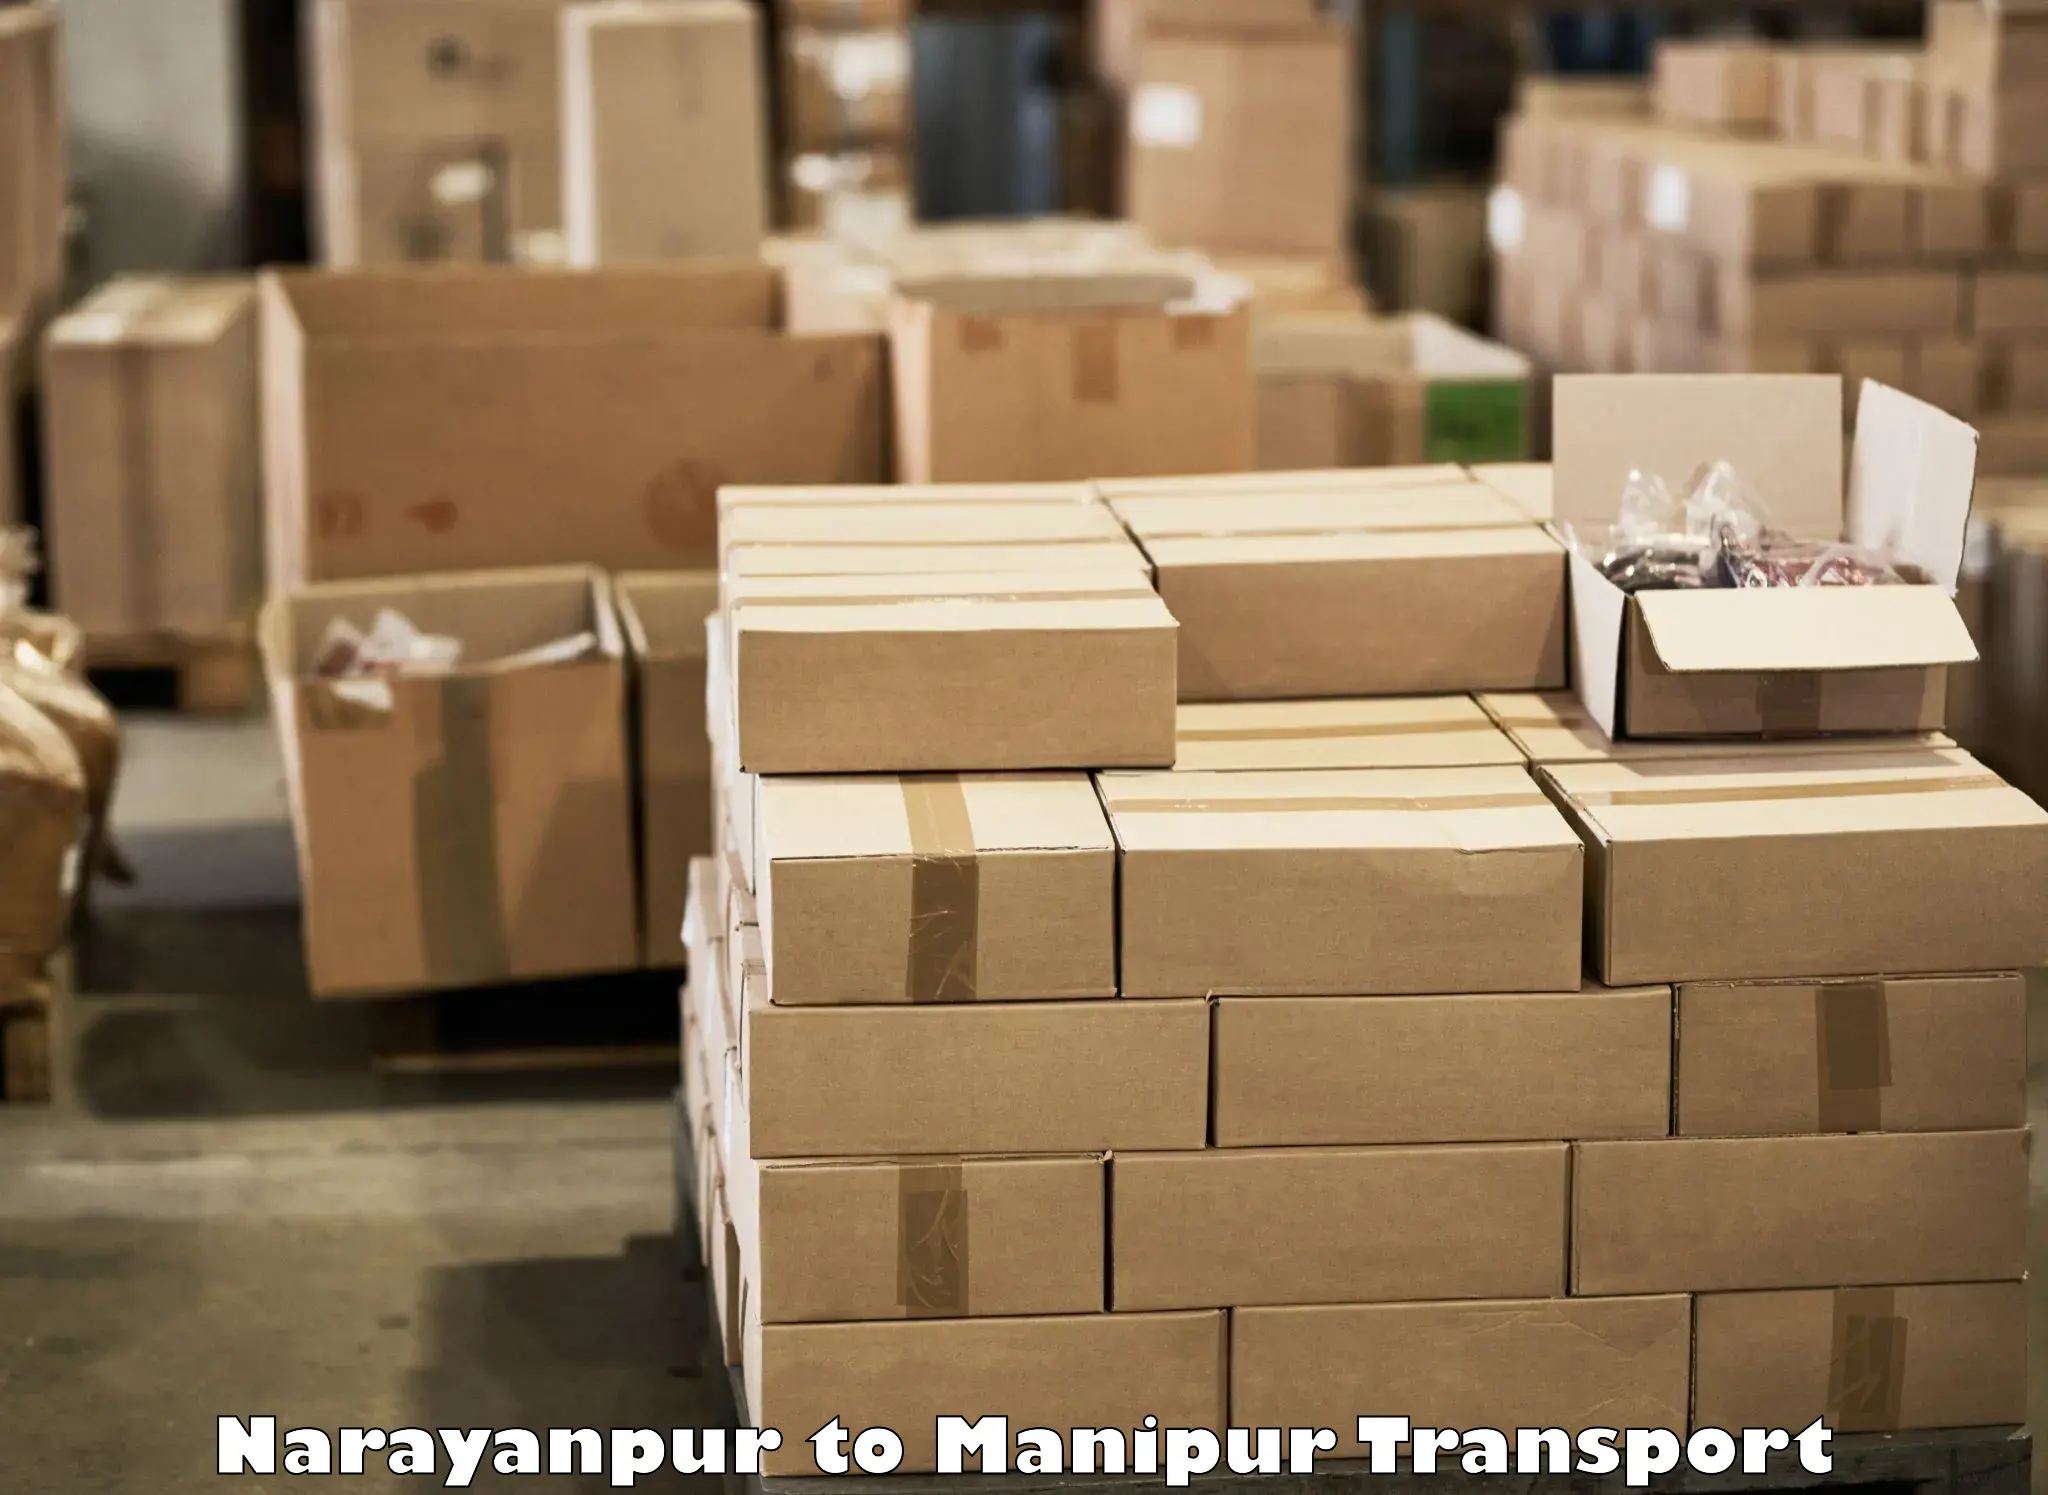 Nationwide transport services Narayanpur to Chandel